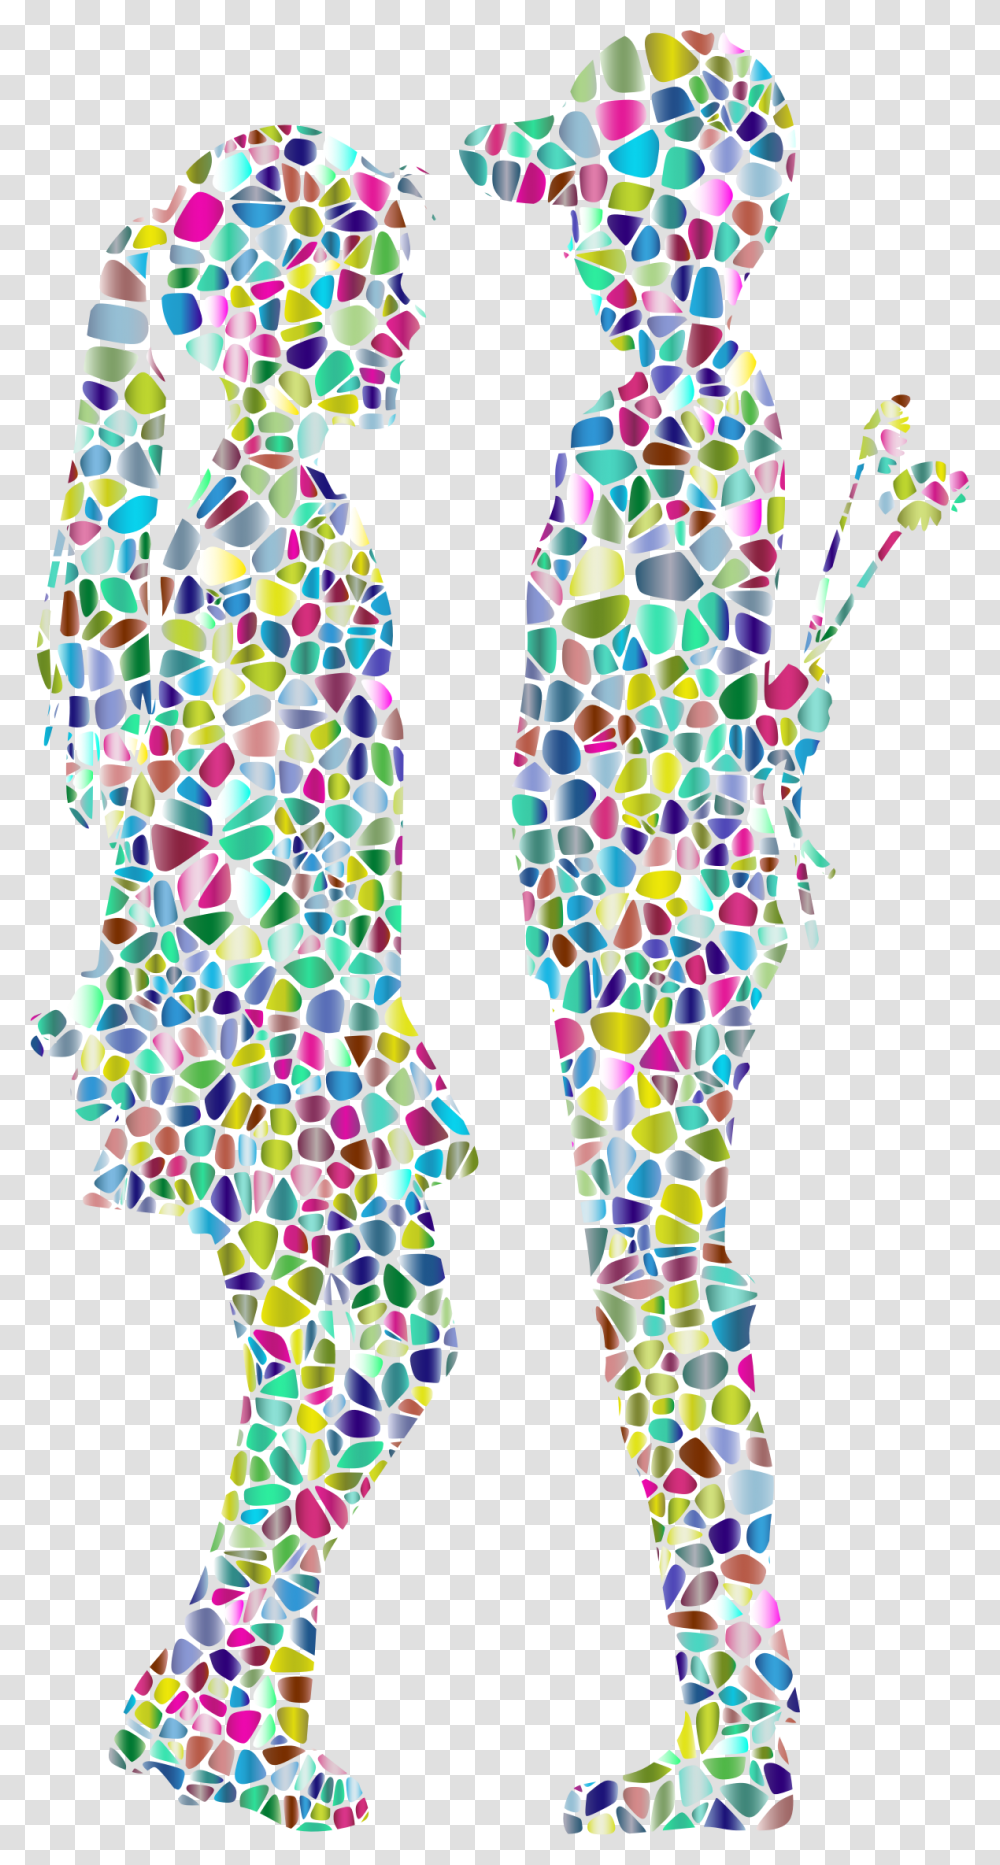 Polyprismatic Tiled Boy Giving Flowers To Girl Silhouette Silhouette With A Boy And Girl, Label, Water Transparent Png